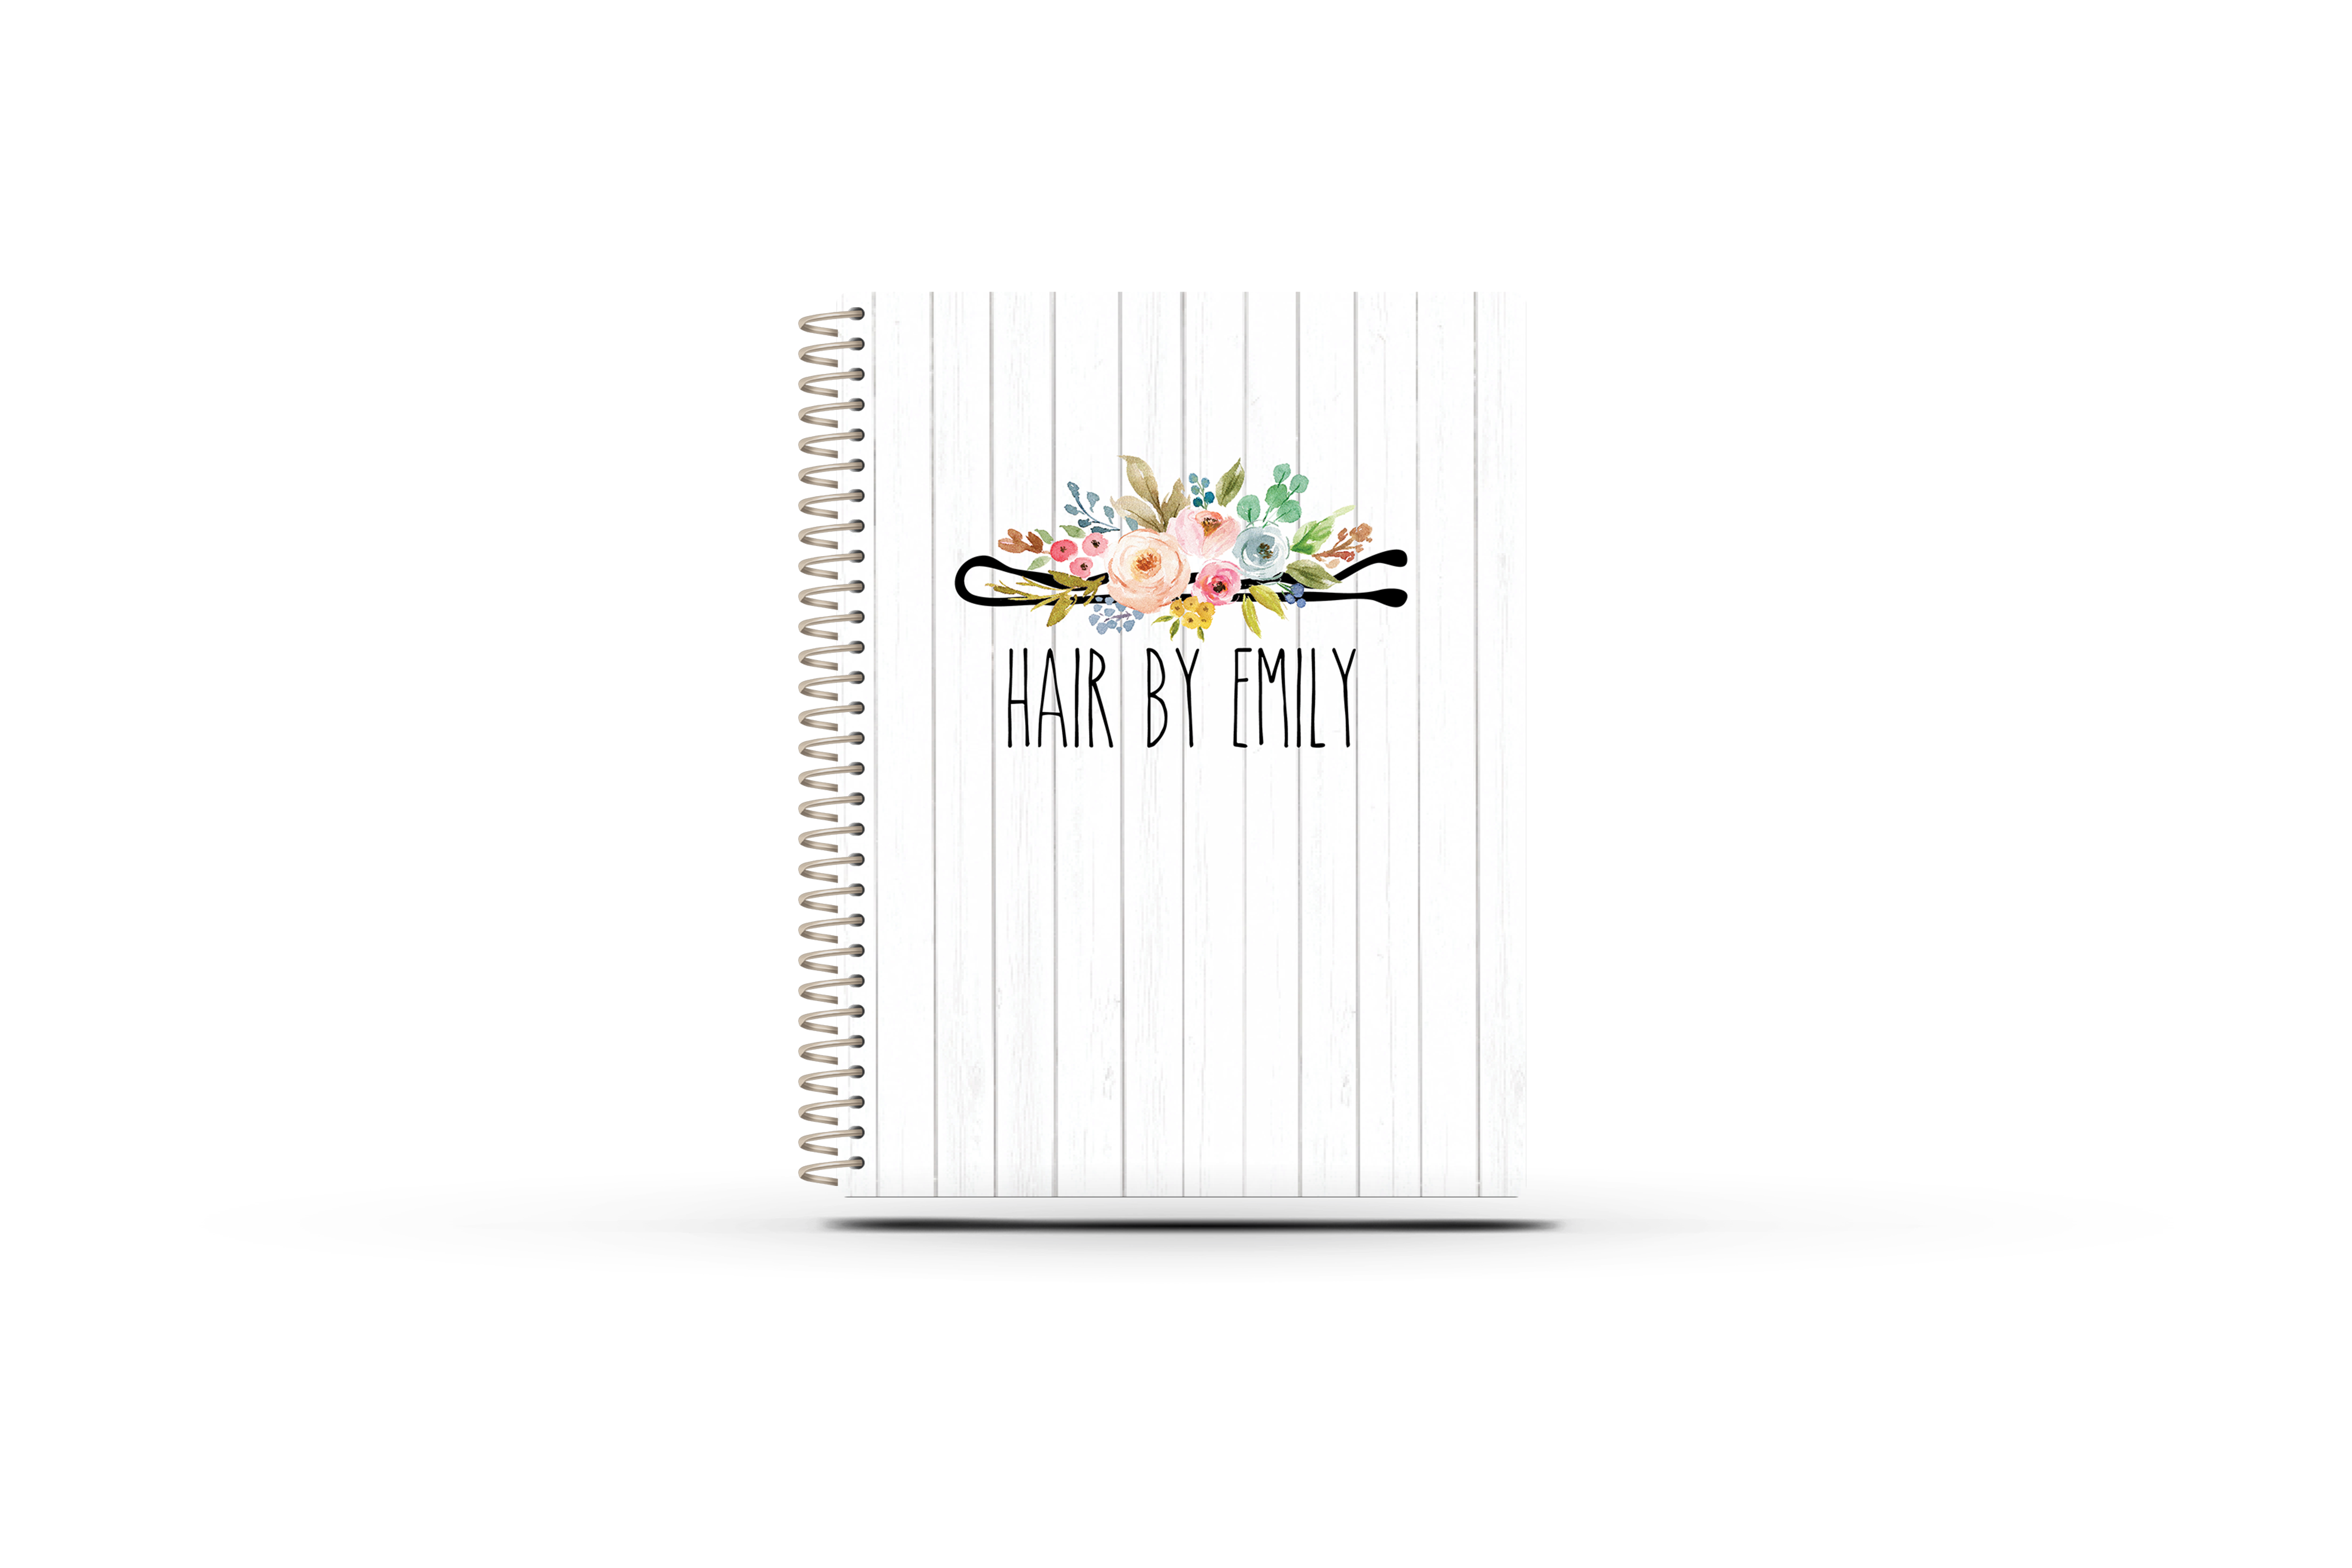 Sales Tracker Appointment Book - FLORAL BOBBY PIN